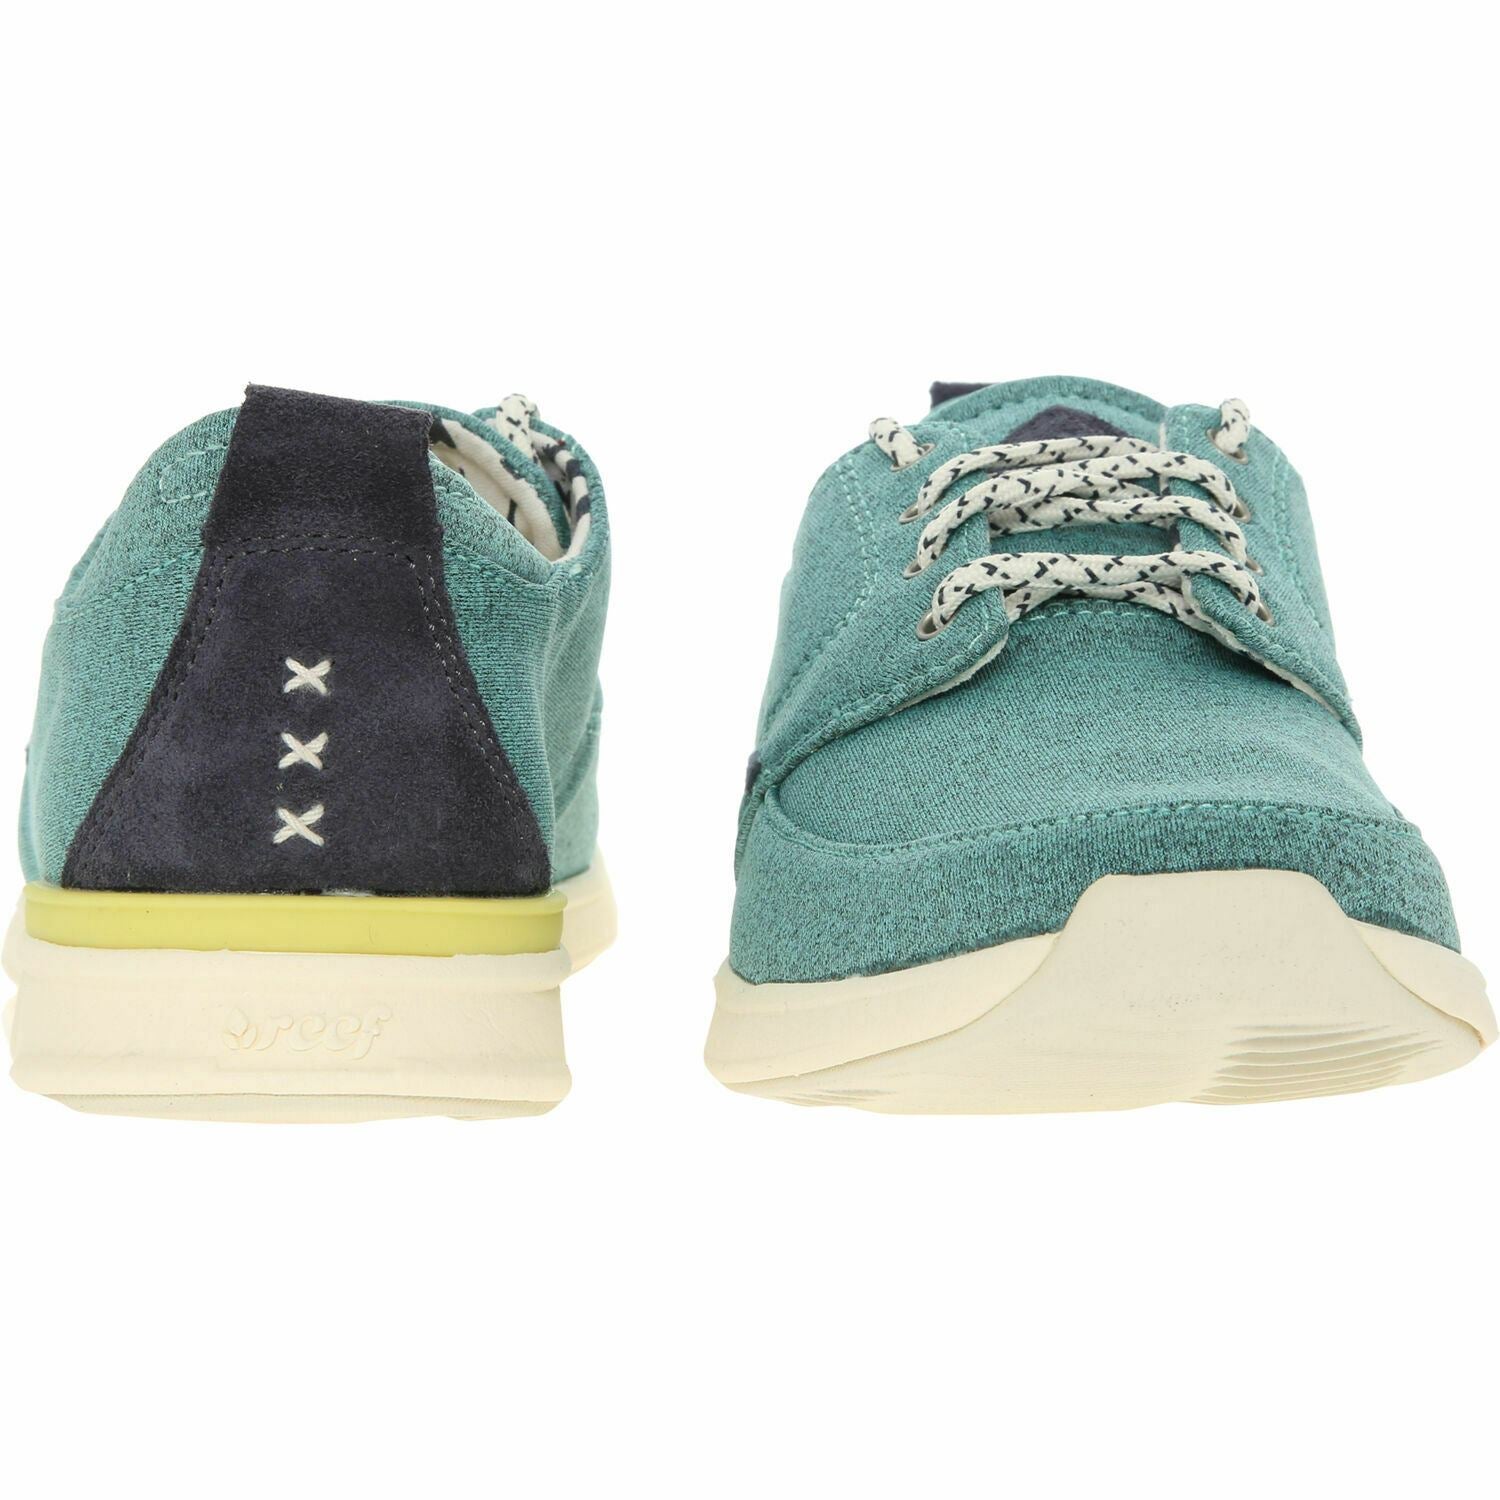 Women's Reef Rover Low Trainers Sneakers in Green/Blue UK 4 EUR 36 USA 6